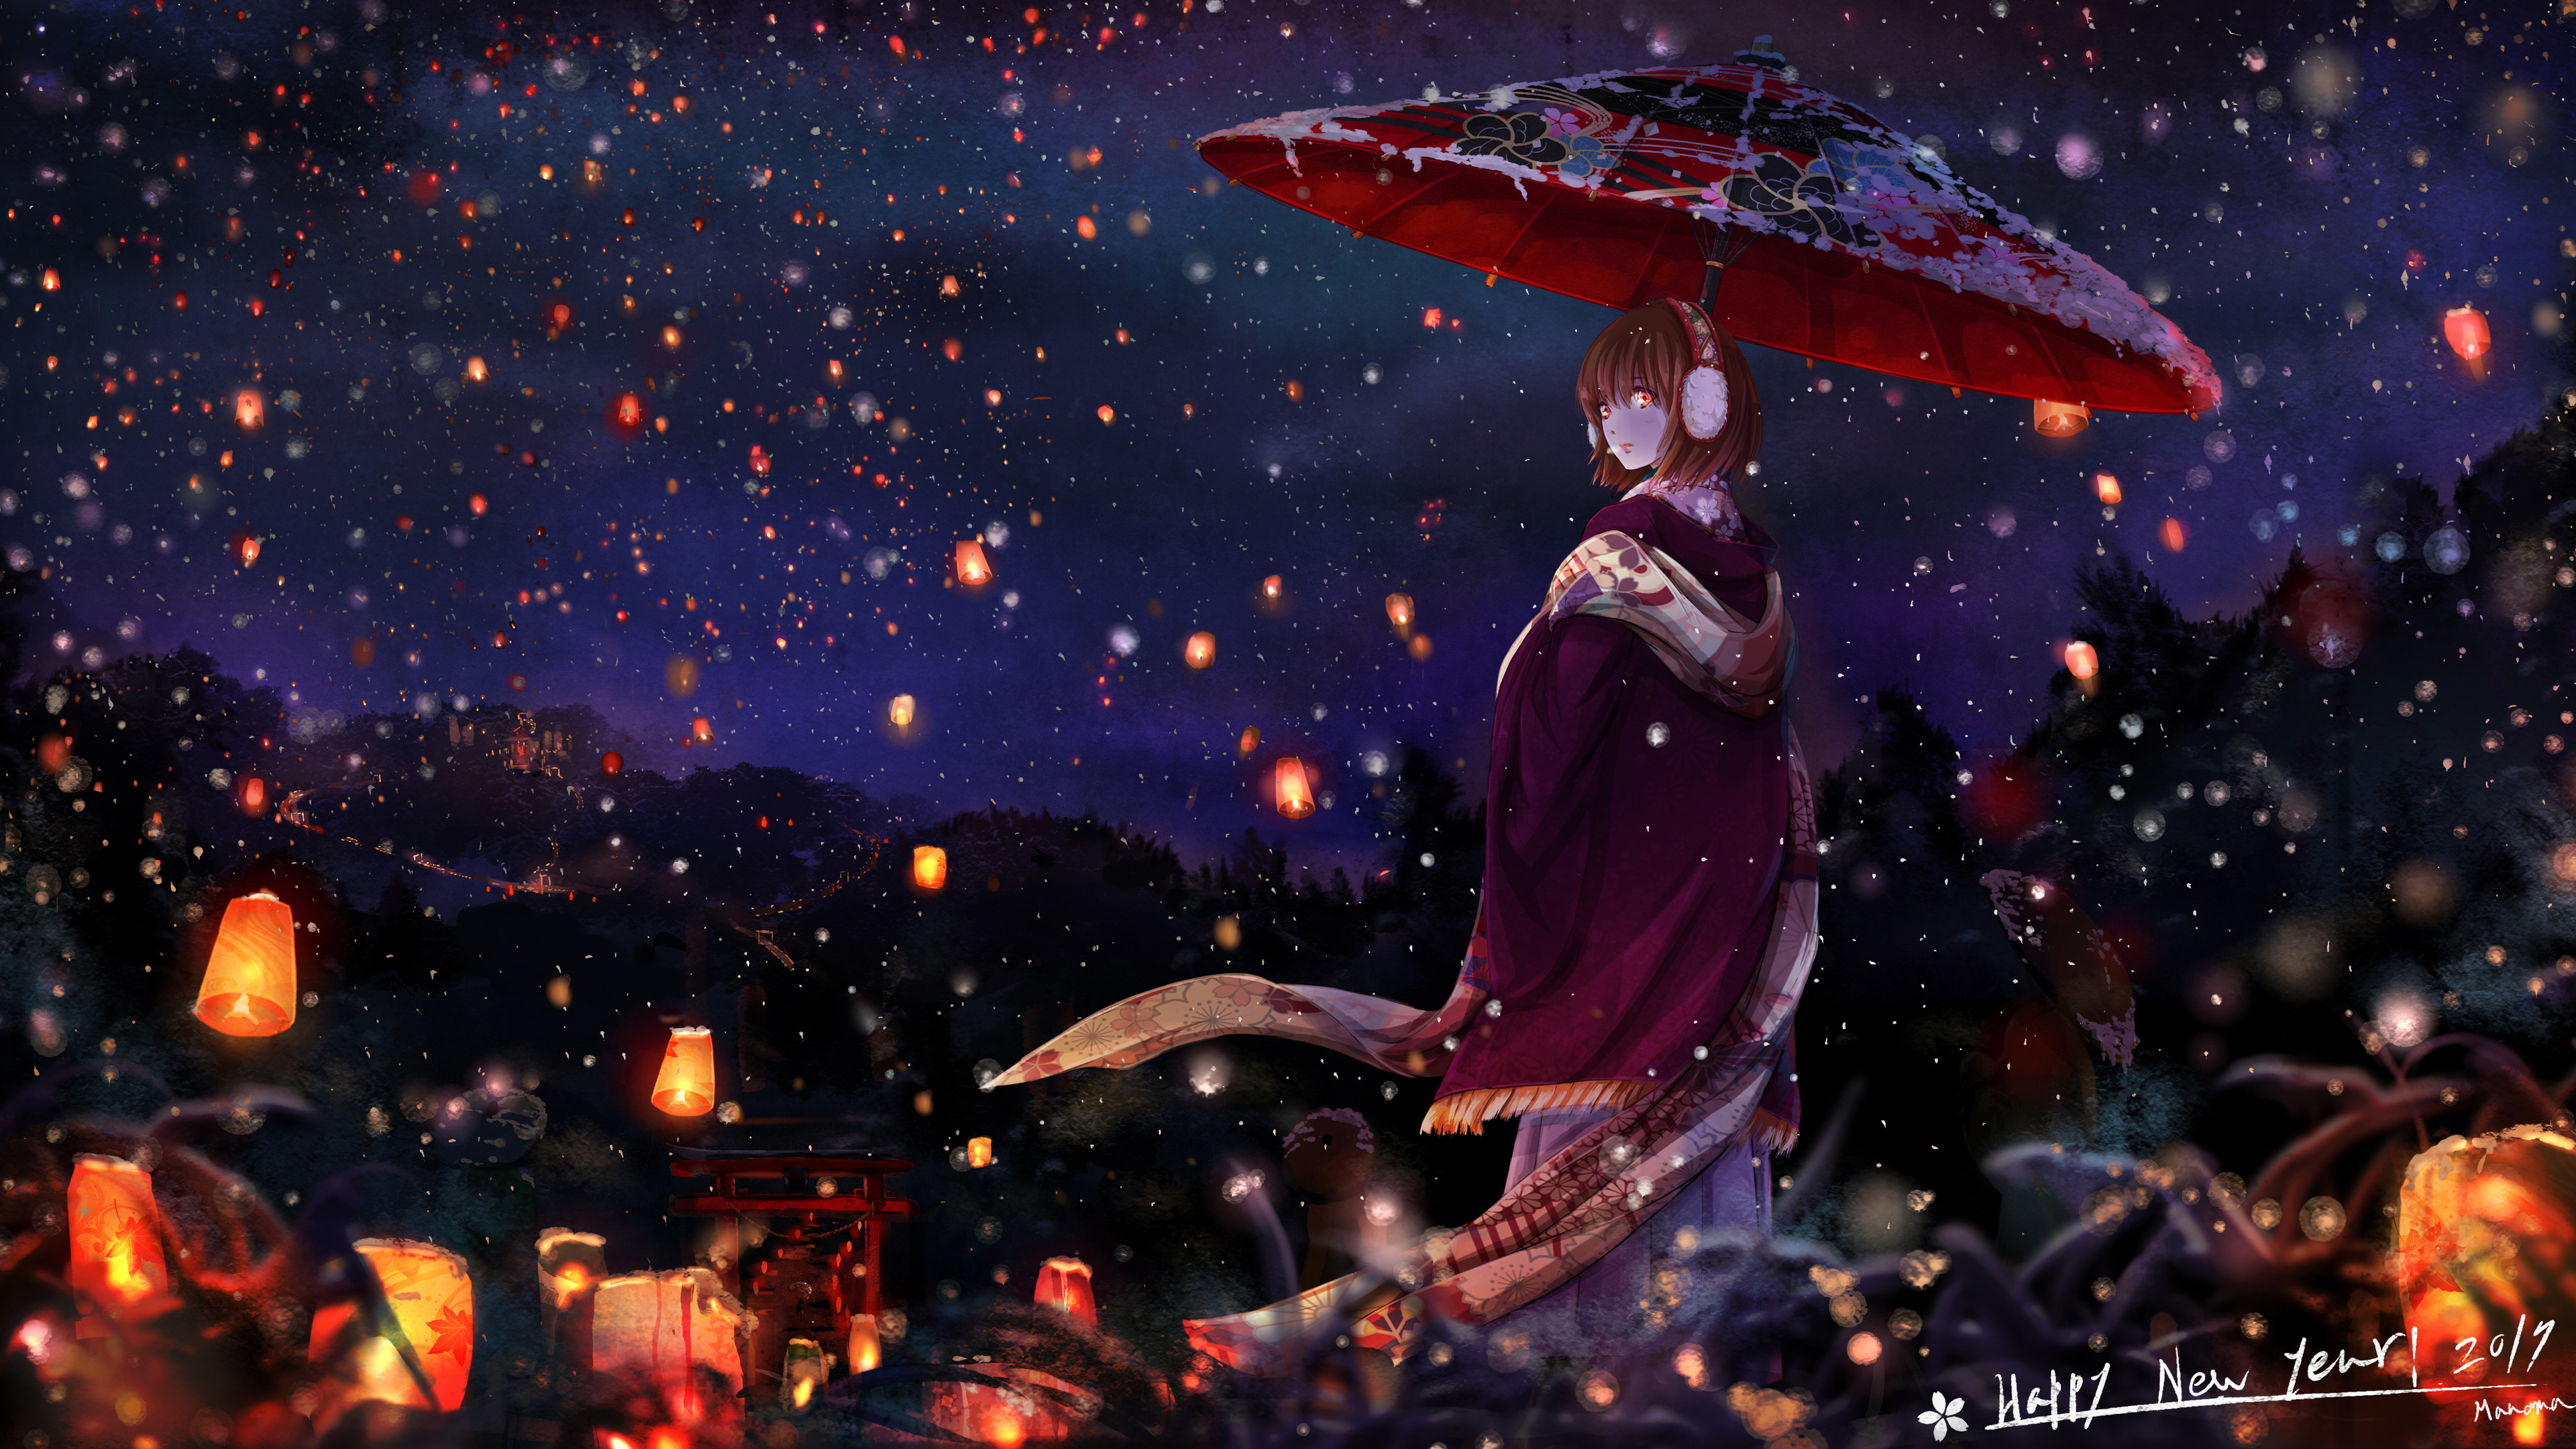 Download wallpaper Sky Anime Night Scenery section art in resolution  1366x768